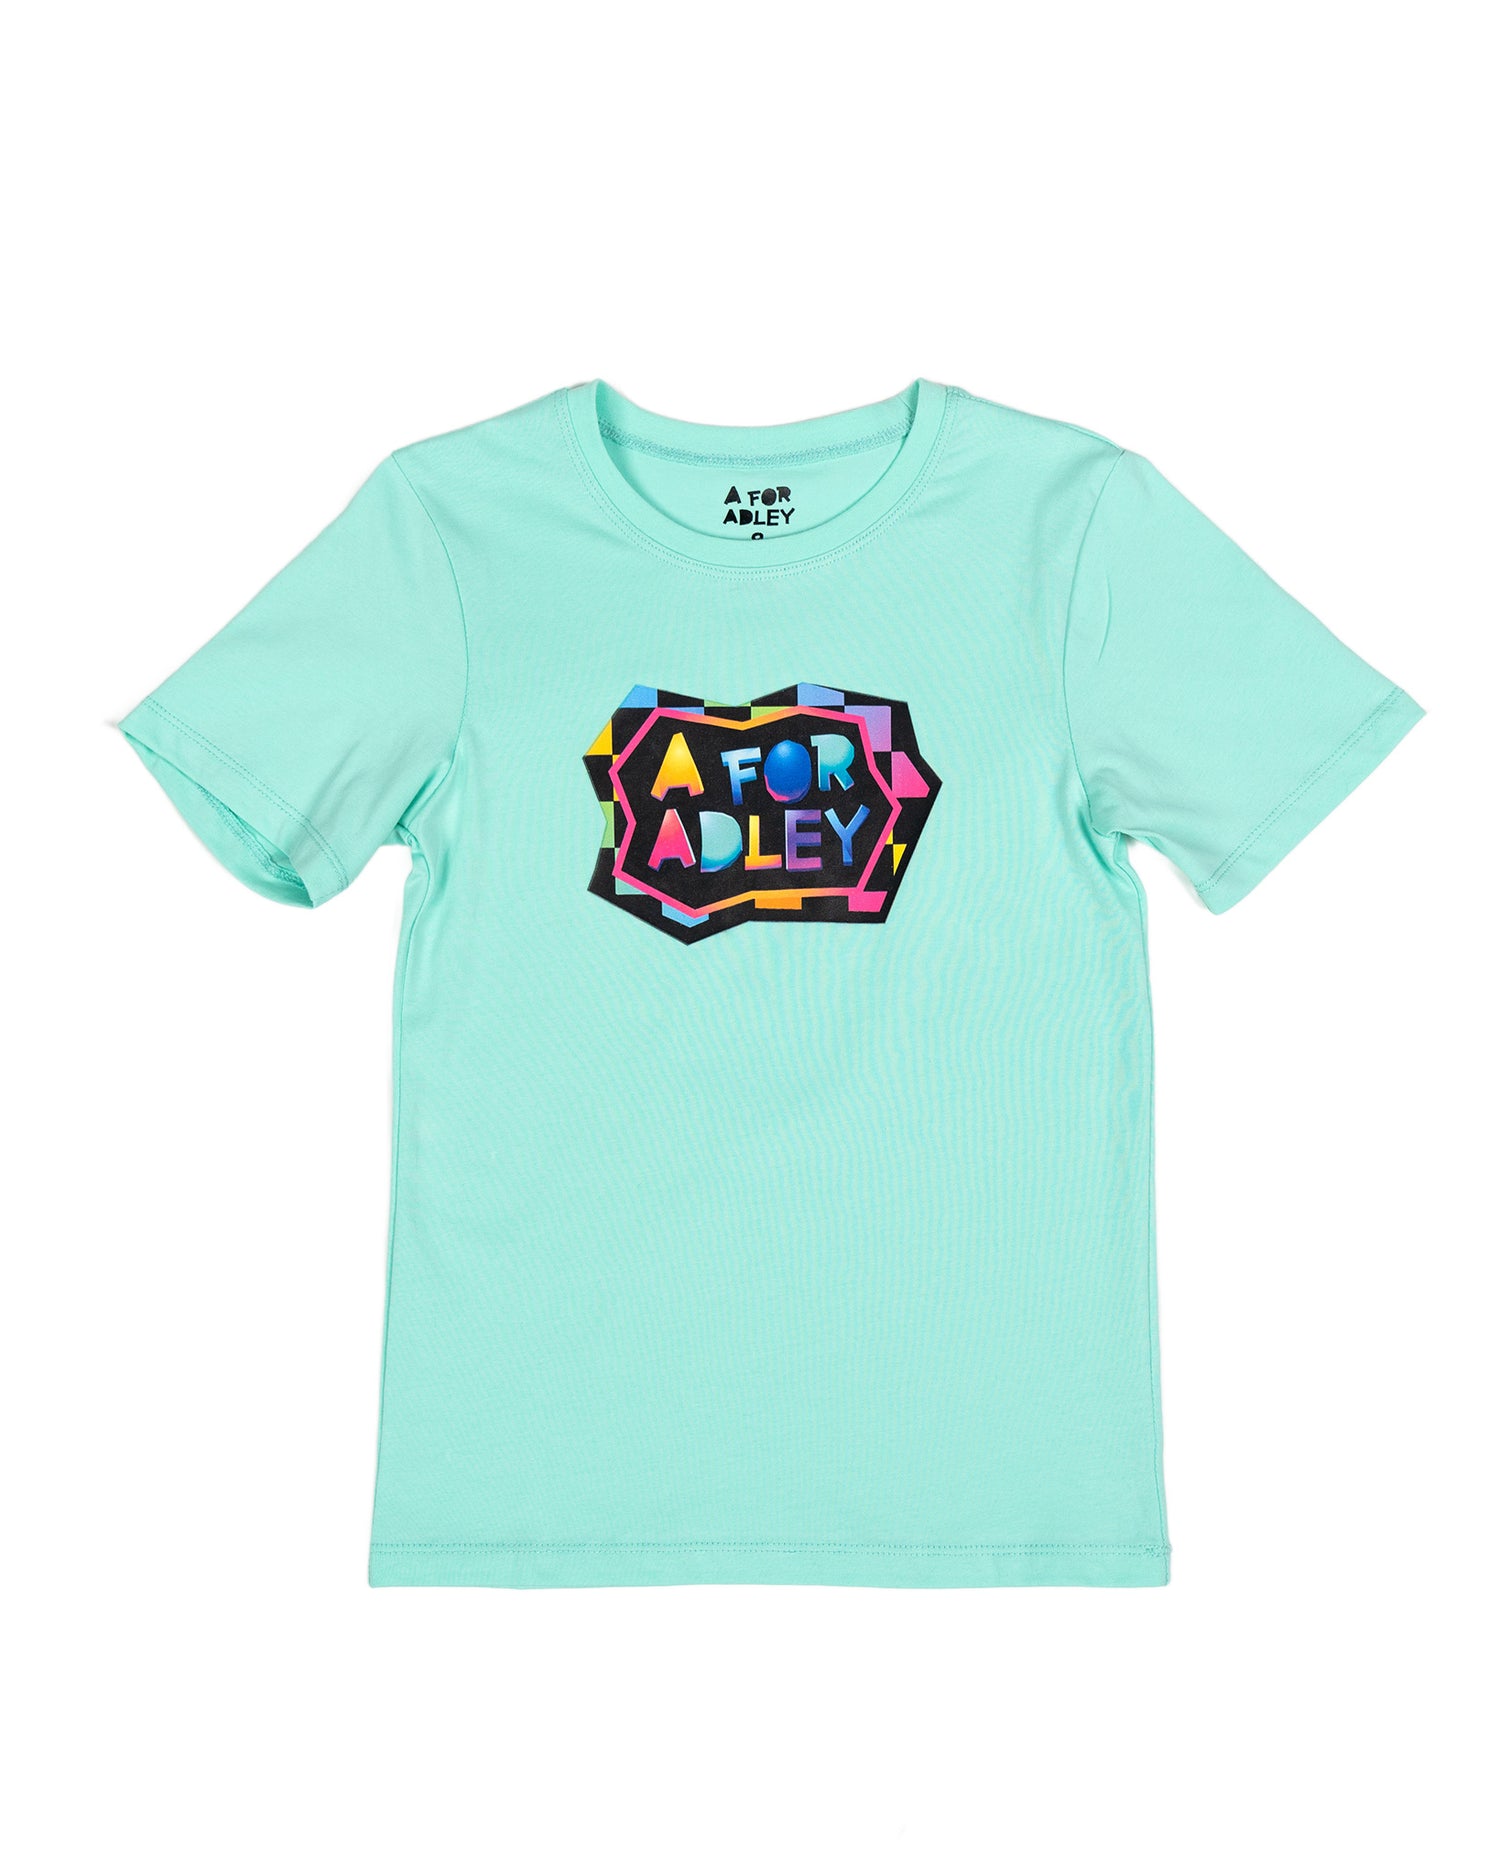 A for Adley Neon Checkered Tee